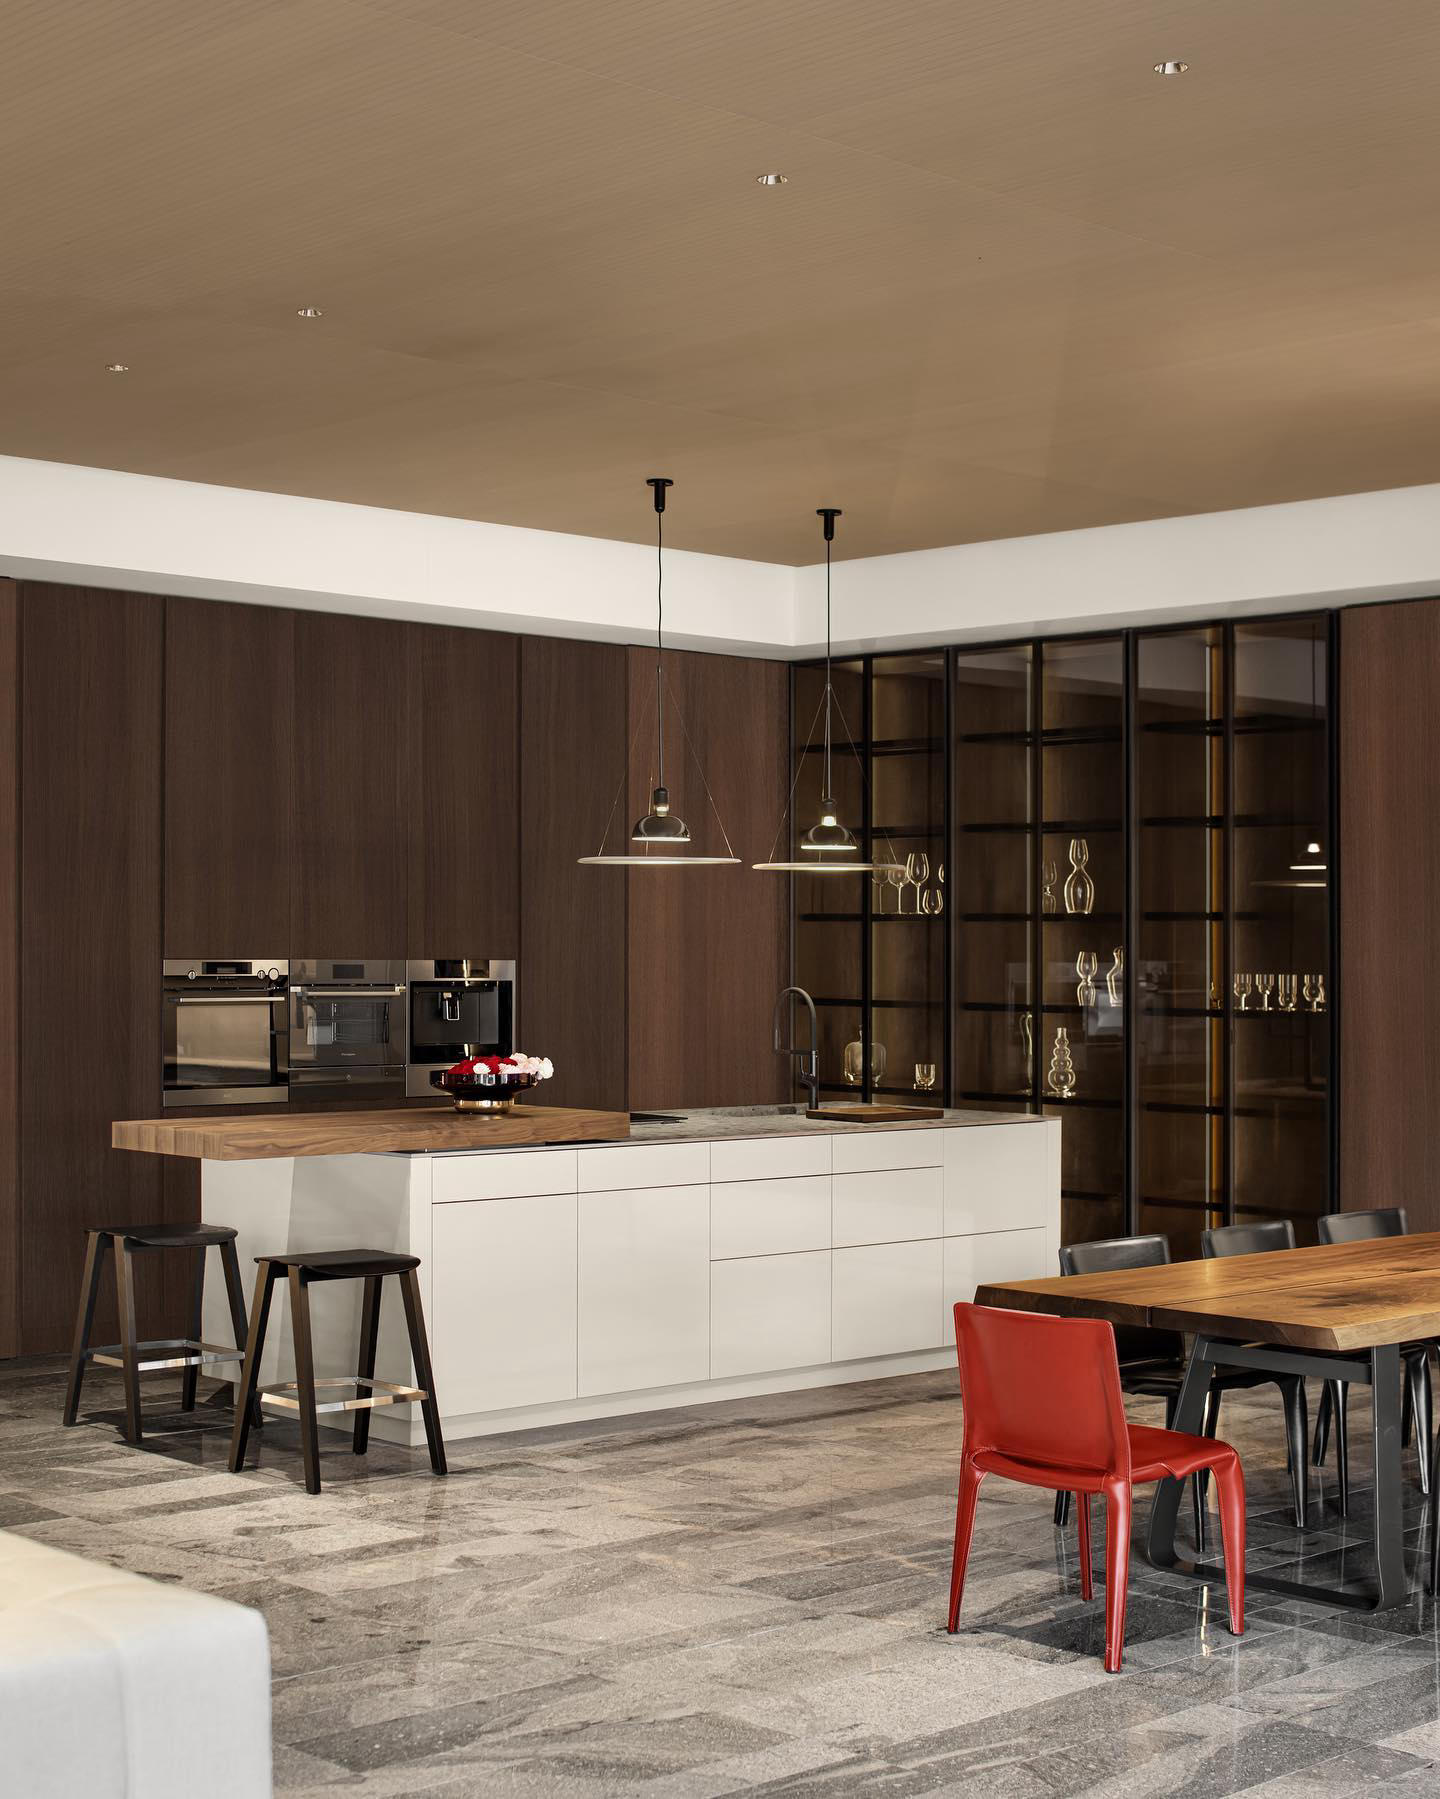 Dark stained oak sets the tone, creating a stylish statement with a strong connection to nature righ